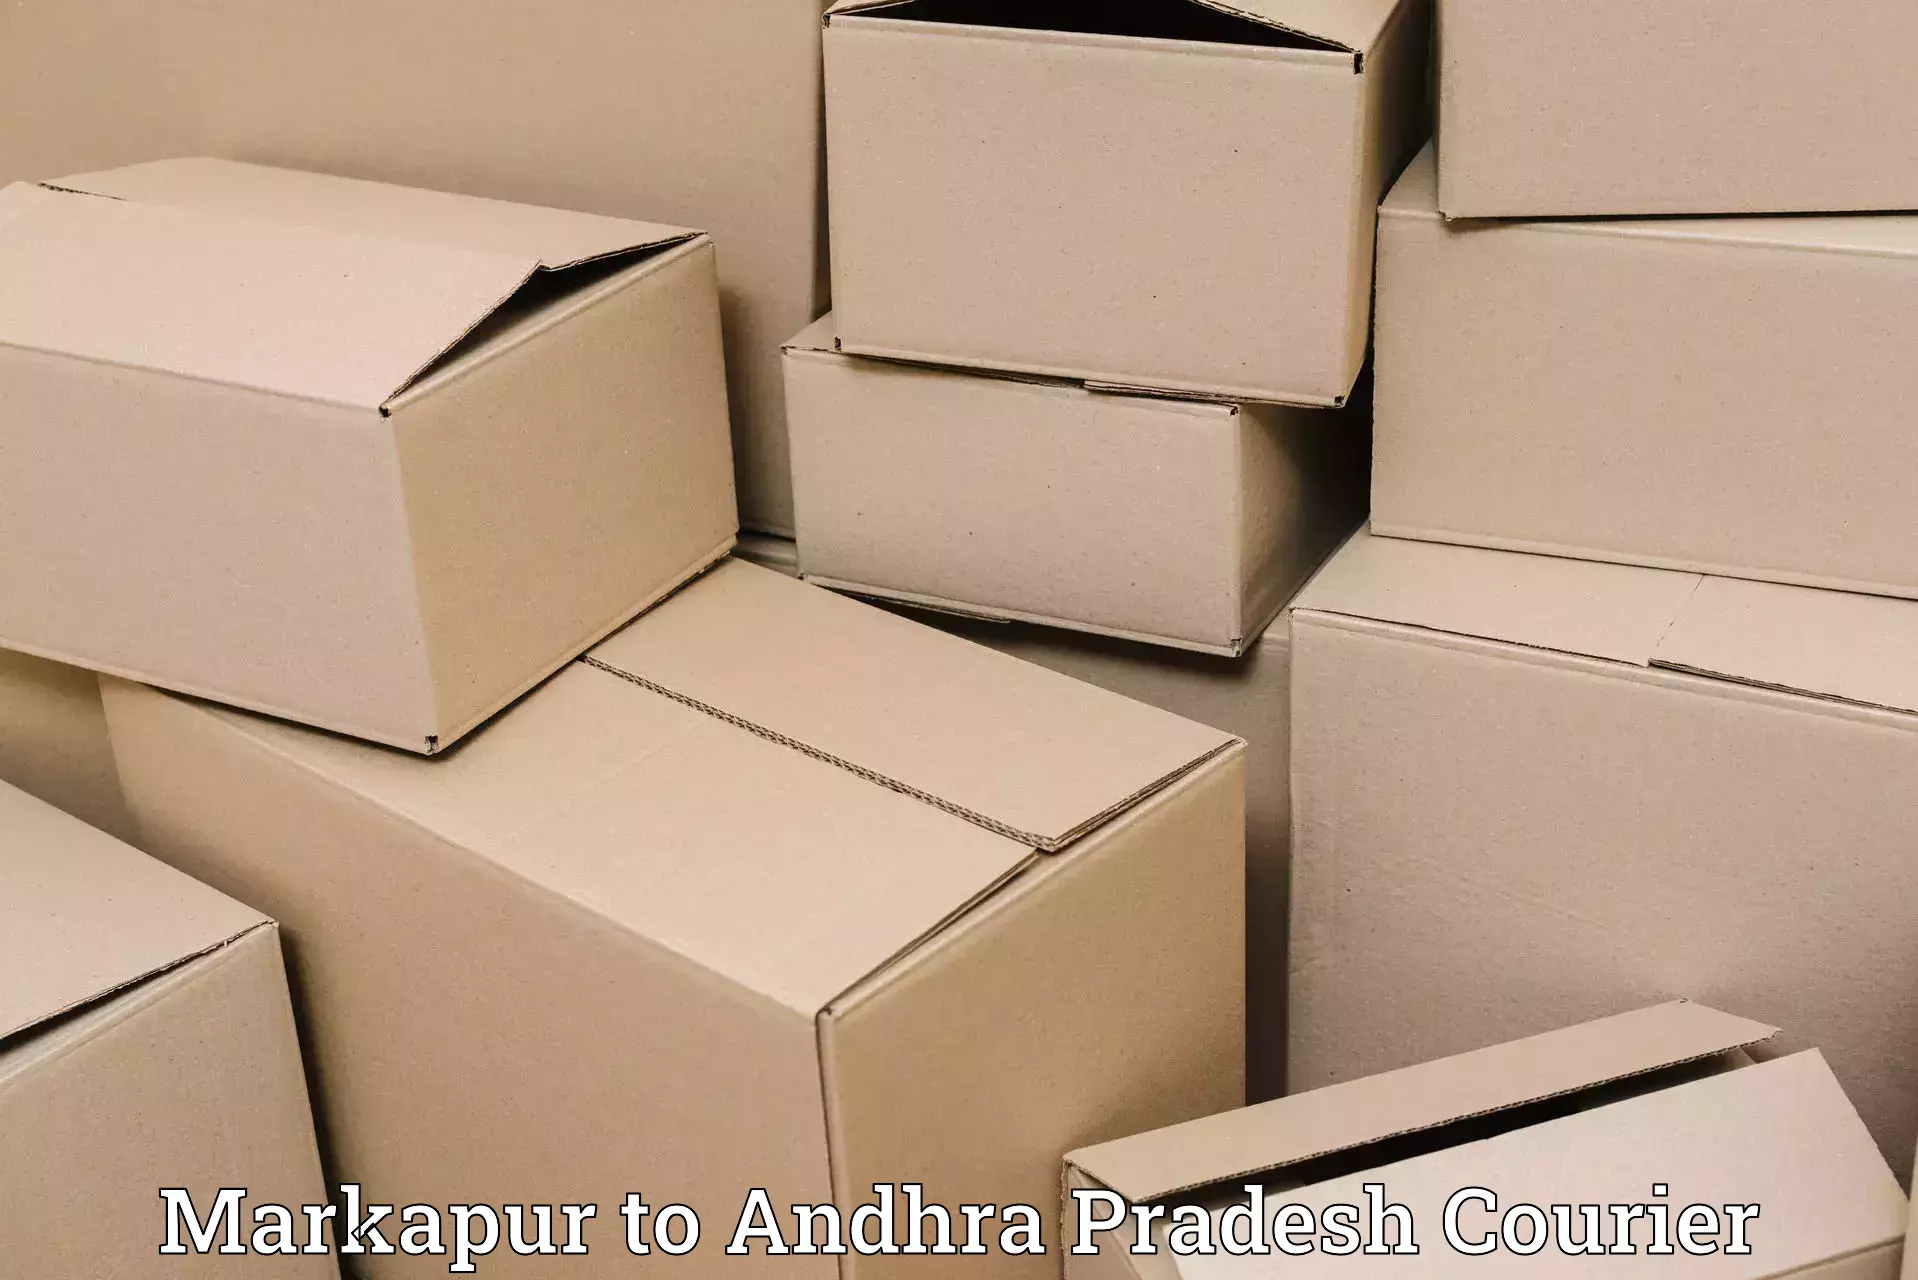 Round-the-clock parcel delivery Markapur to Chodavaram